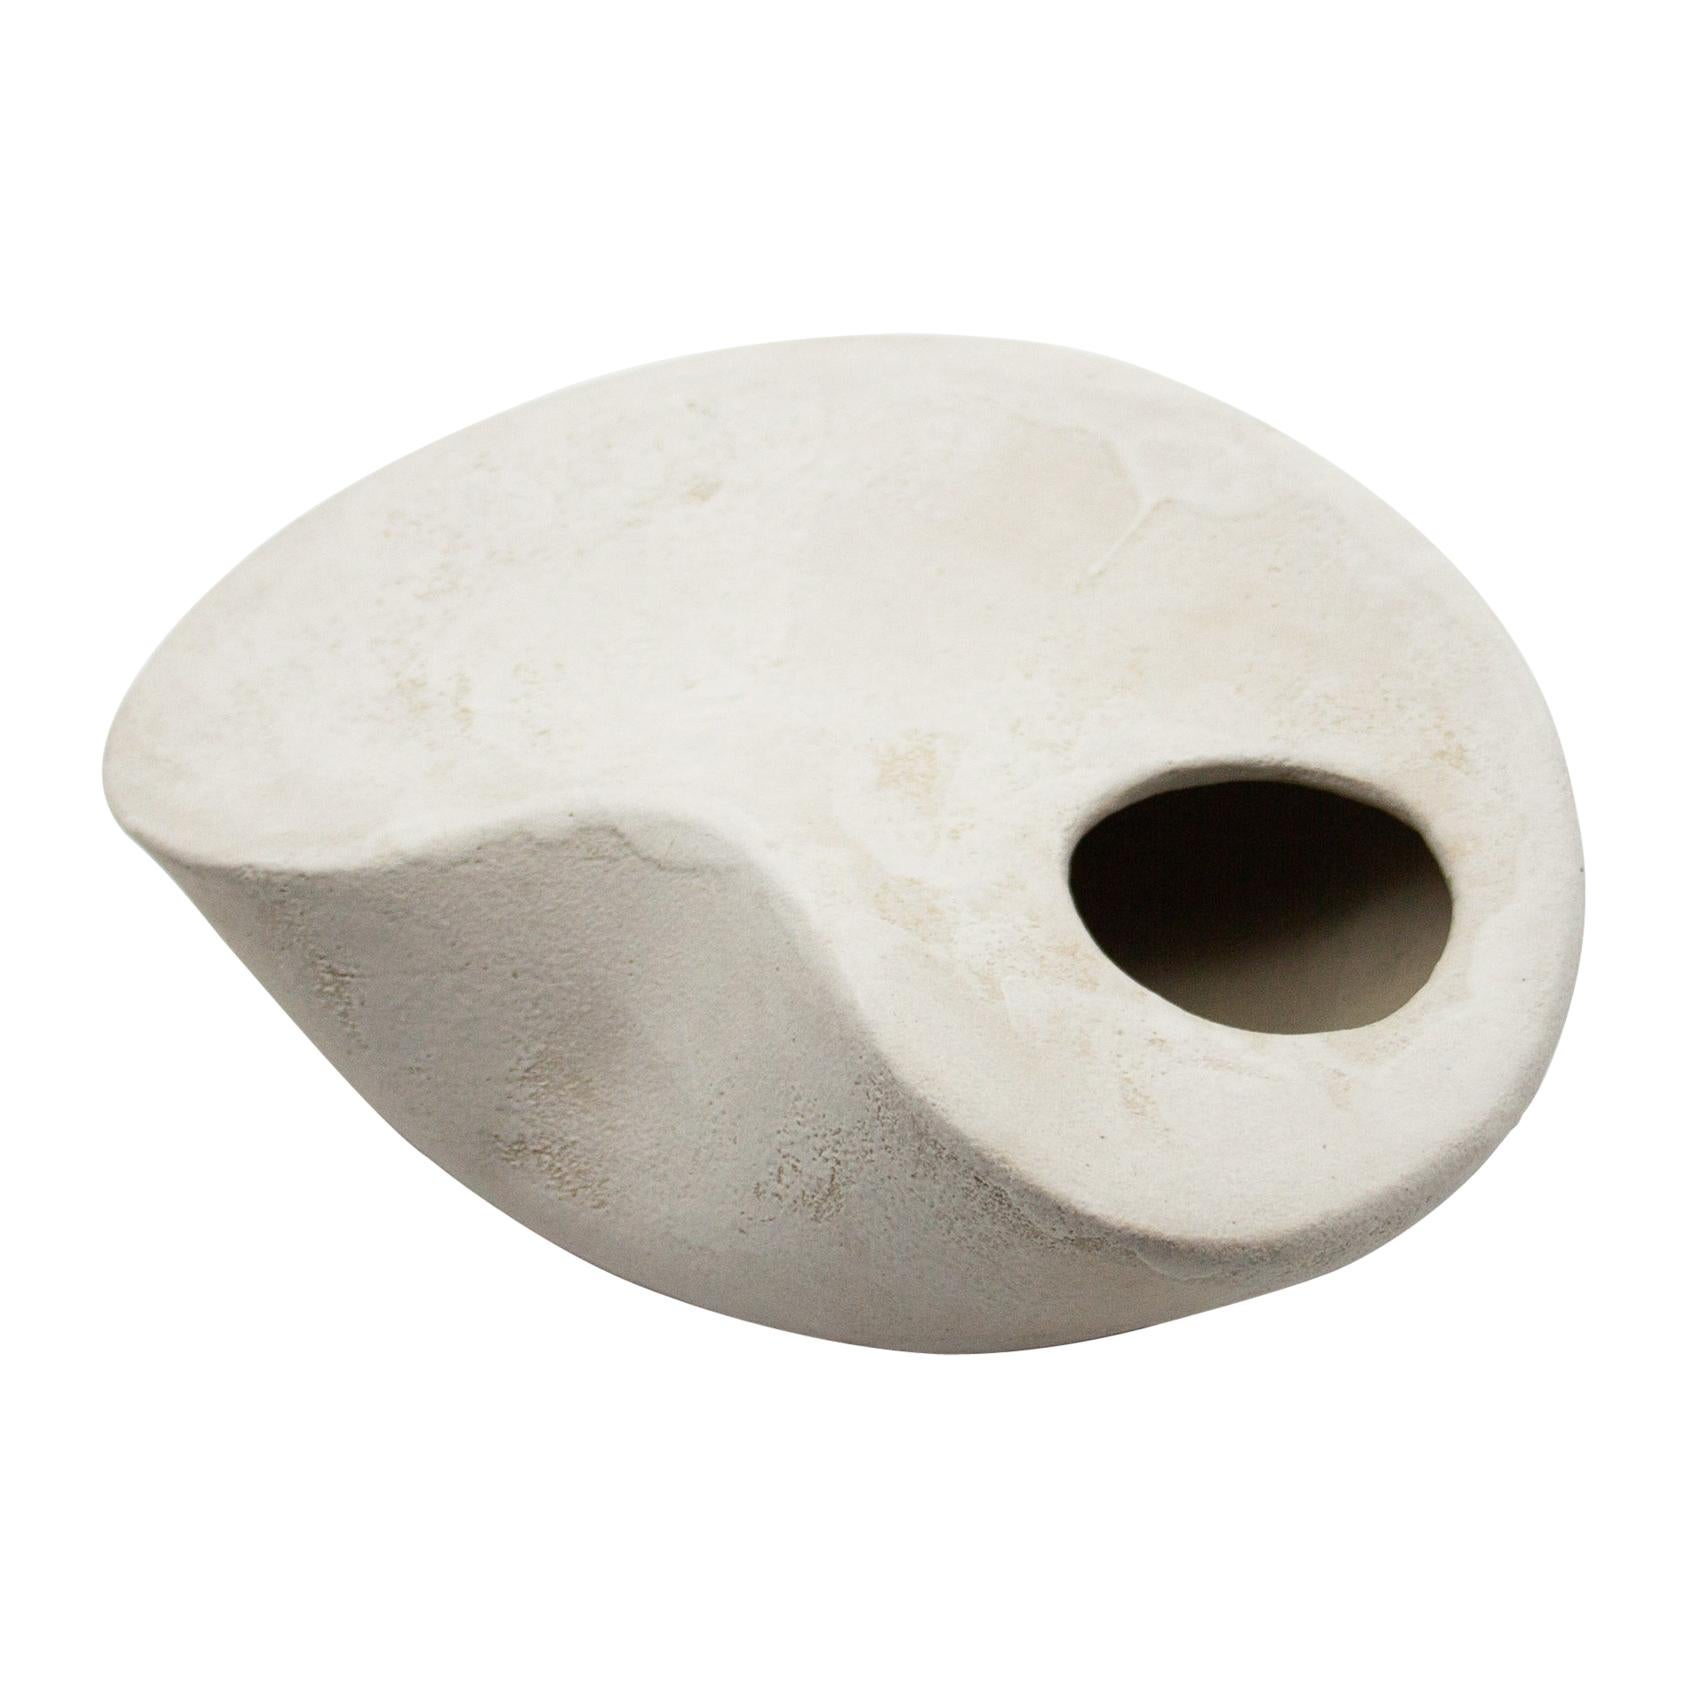 Curved Form Handcrafted Stoneware Sculpture with Porcelain Slip Decoration For Sale